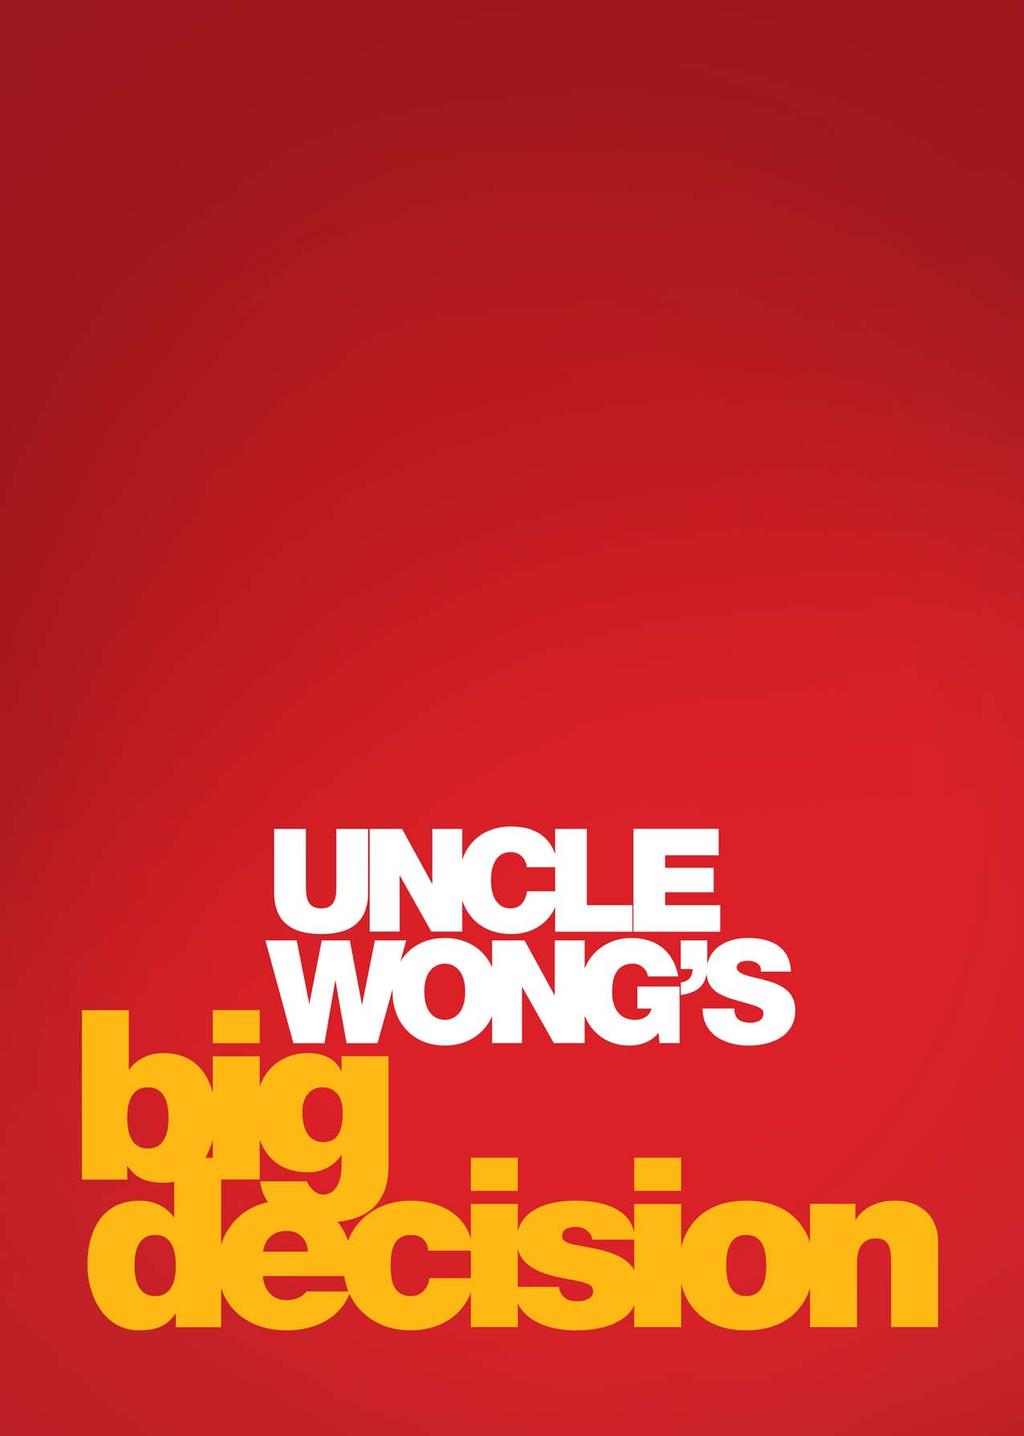 Scenario Uncle Wong Foods is a manufacturer of chilled ready meals. They deliver to all the major supermarkets.